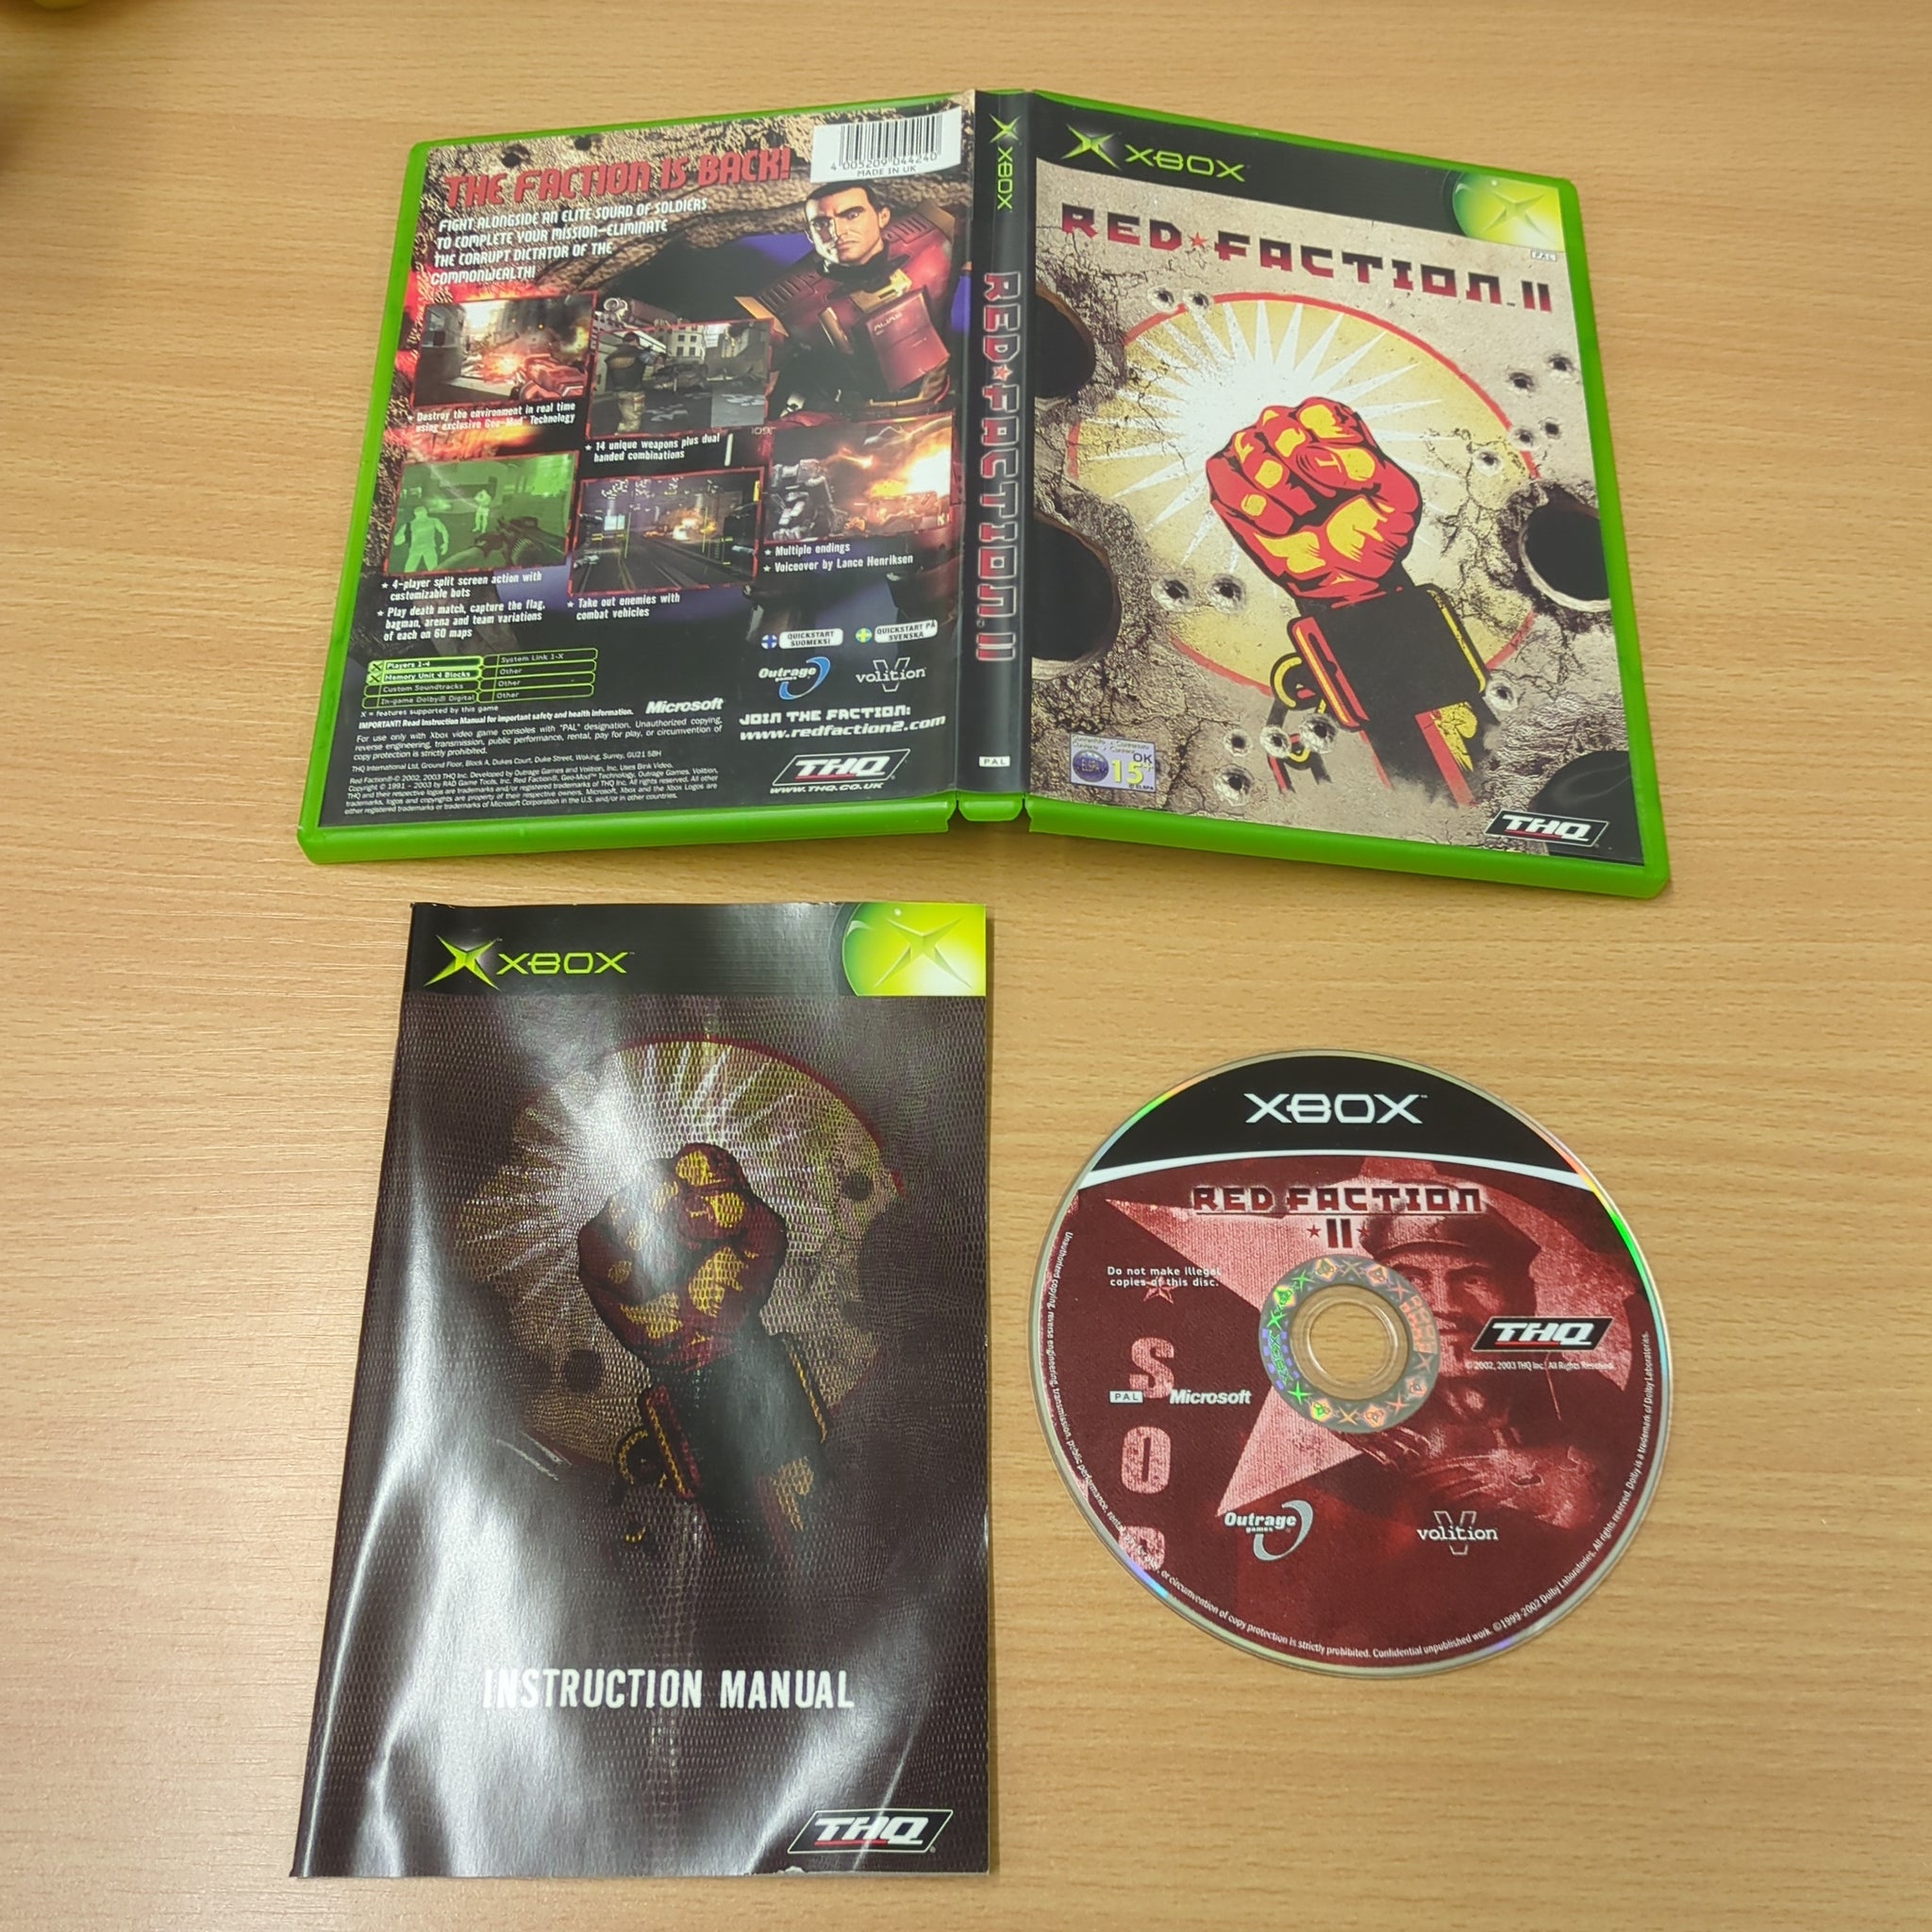 Red Faction II original Xbox game